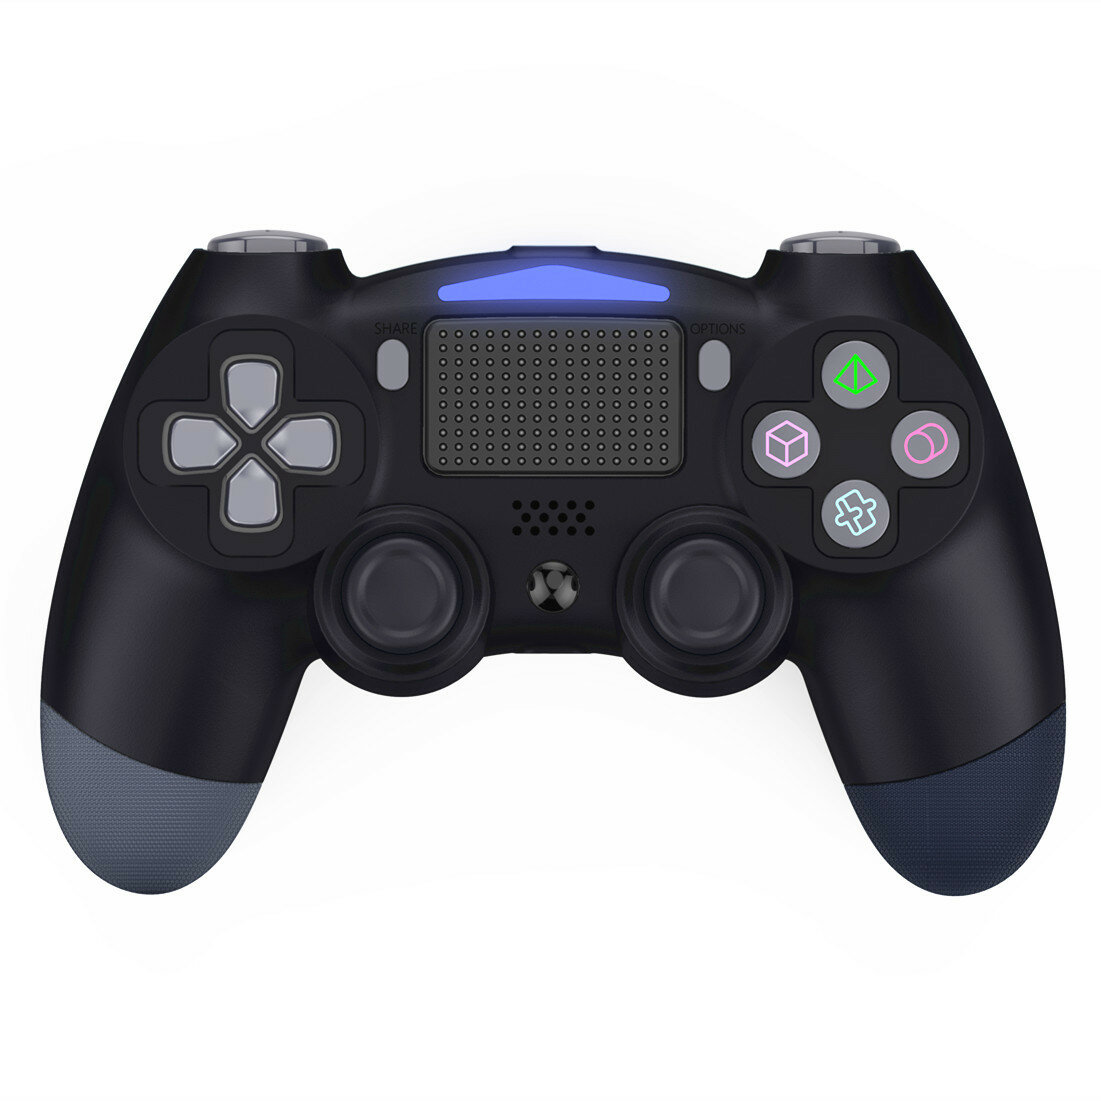 

bluetooth Wireless Gamepad Game joystick Controller for PS4 Game Console